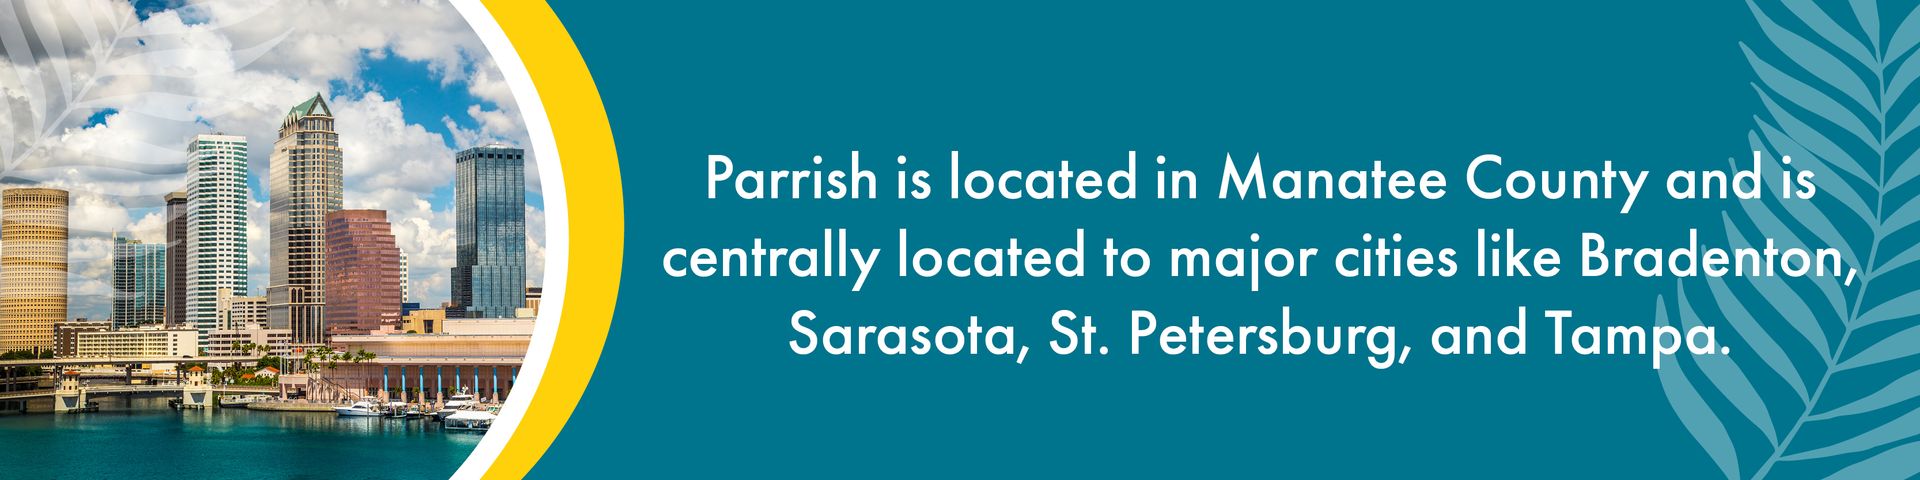 Parrish is centrally located to major cities in florida